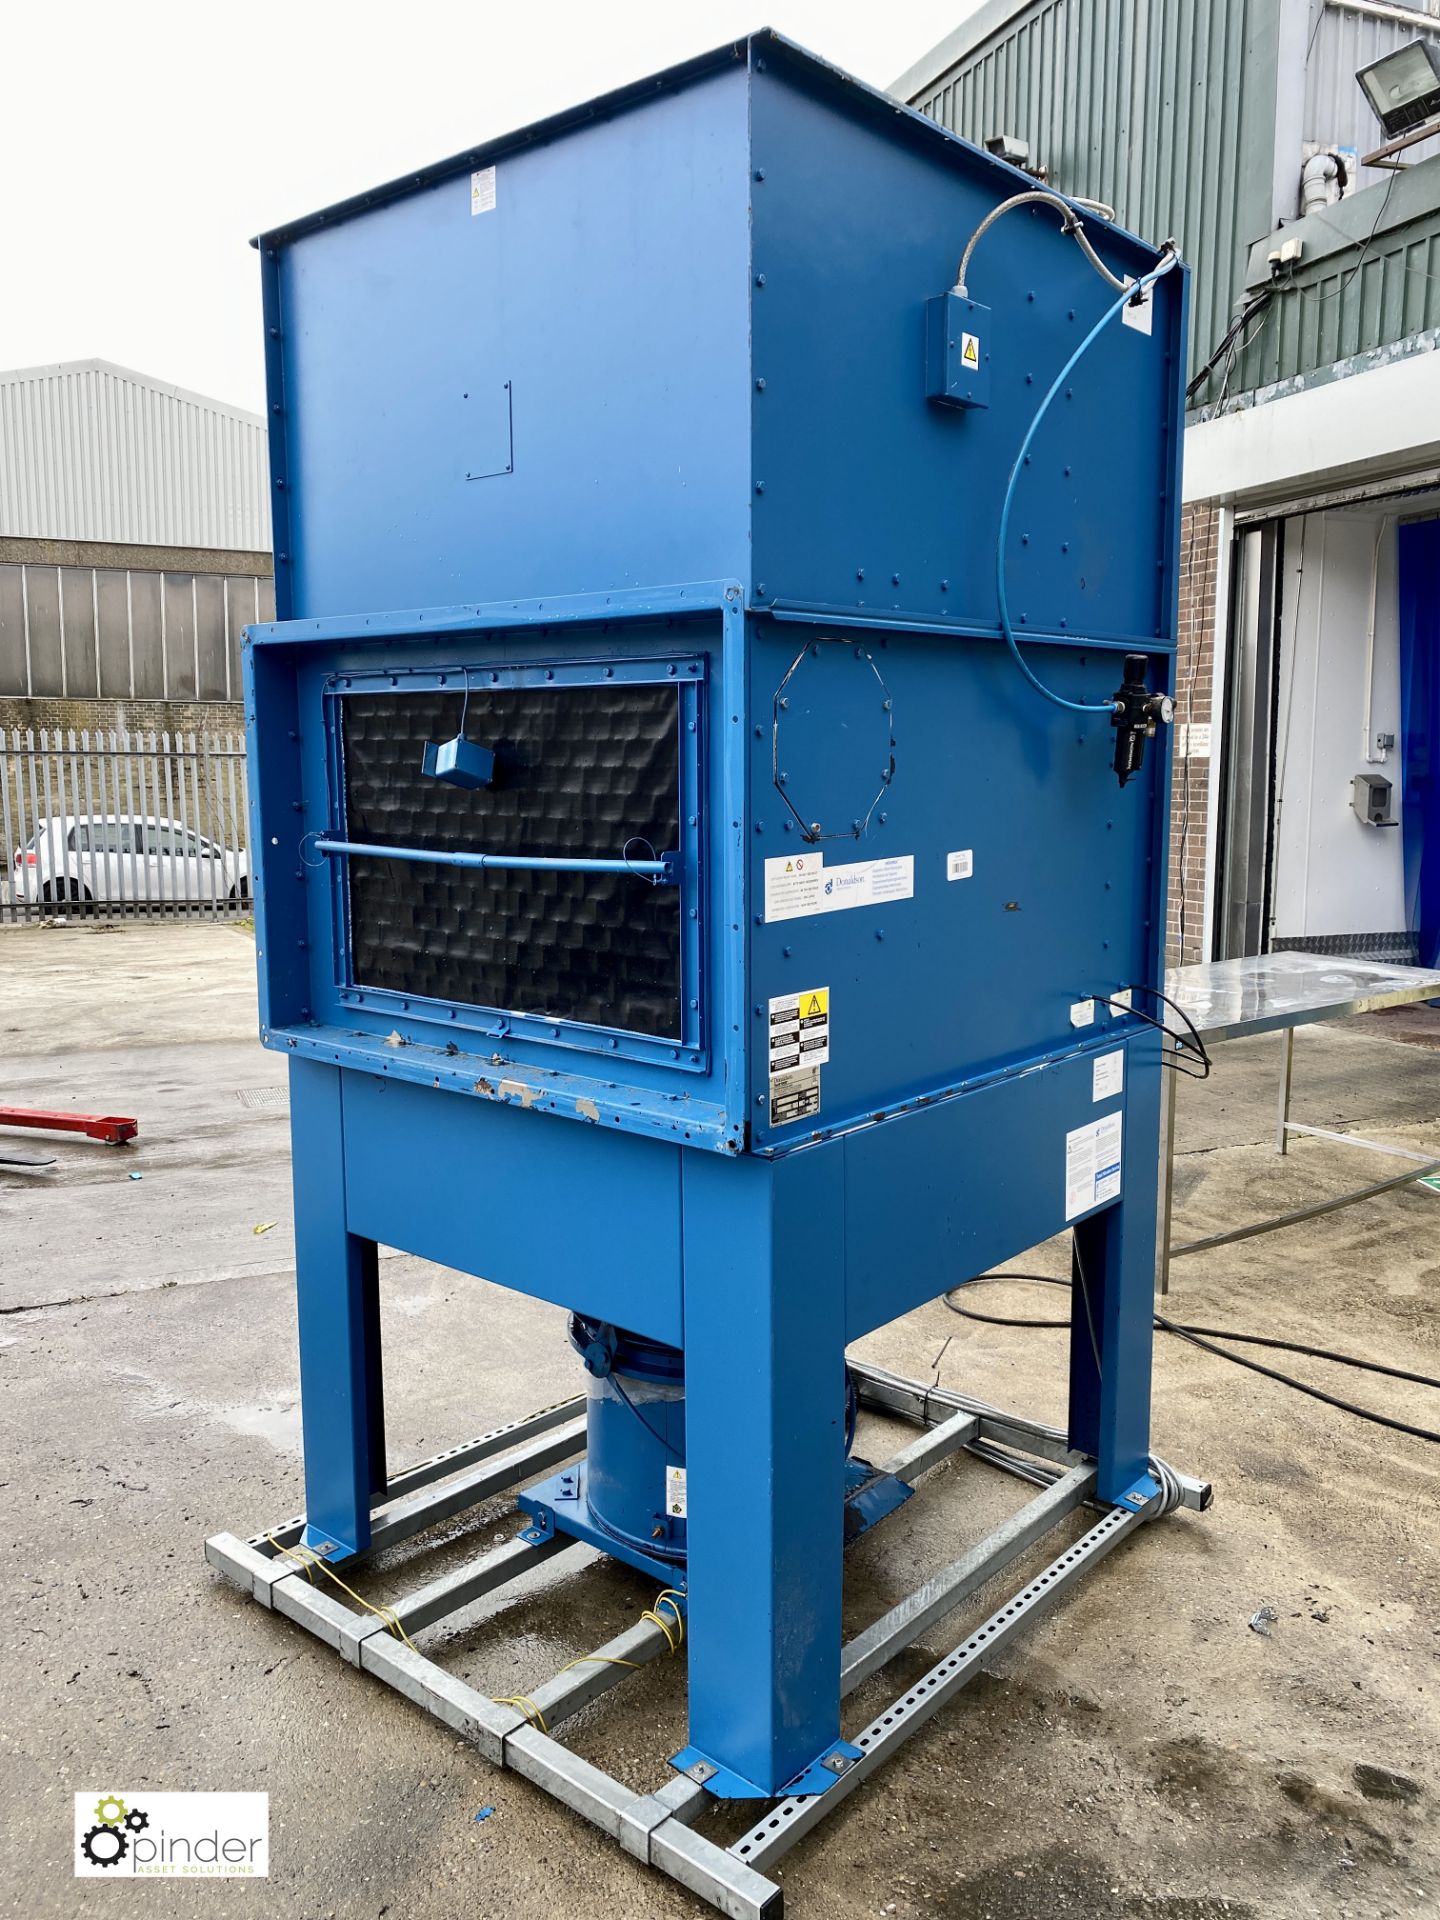 Donaldson Torit DCE C30-3G8 Dust Extraction Cabinet, year 2015, serial number 00058064 (please - Image 4 of 6